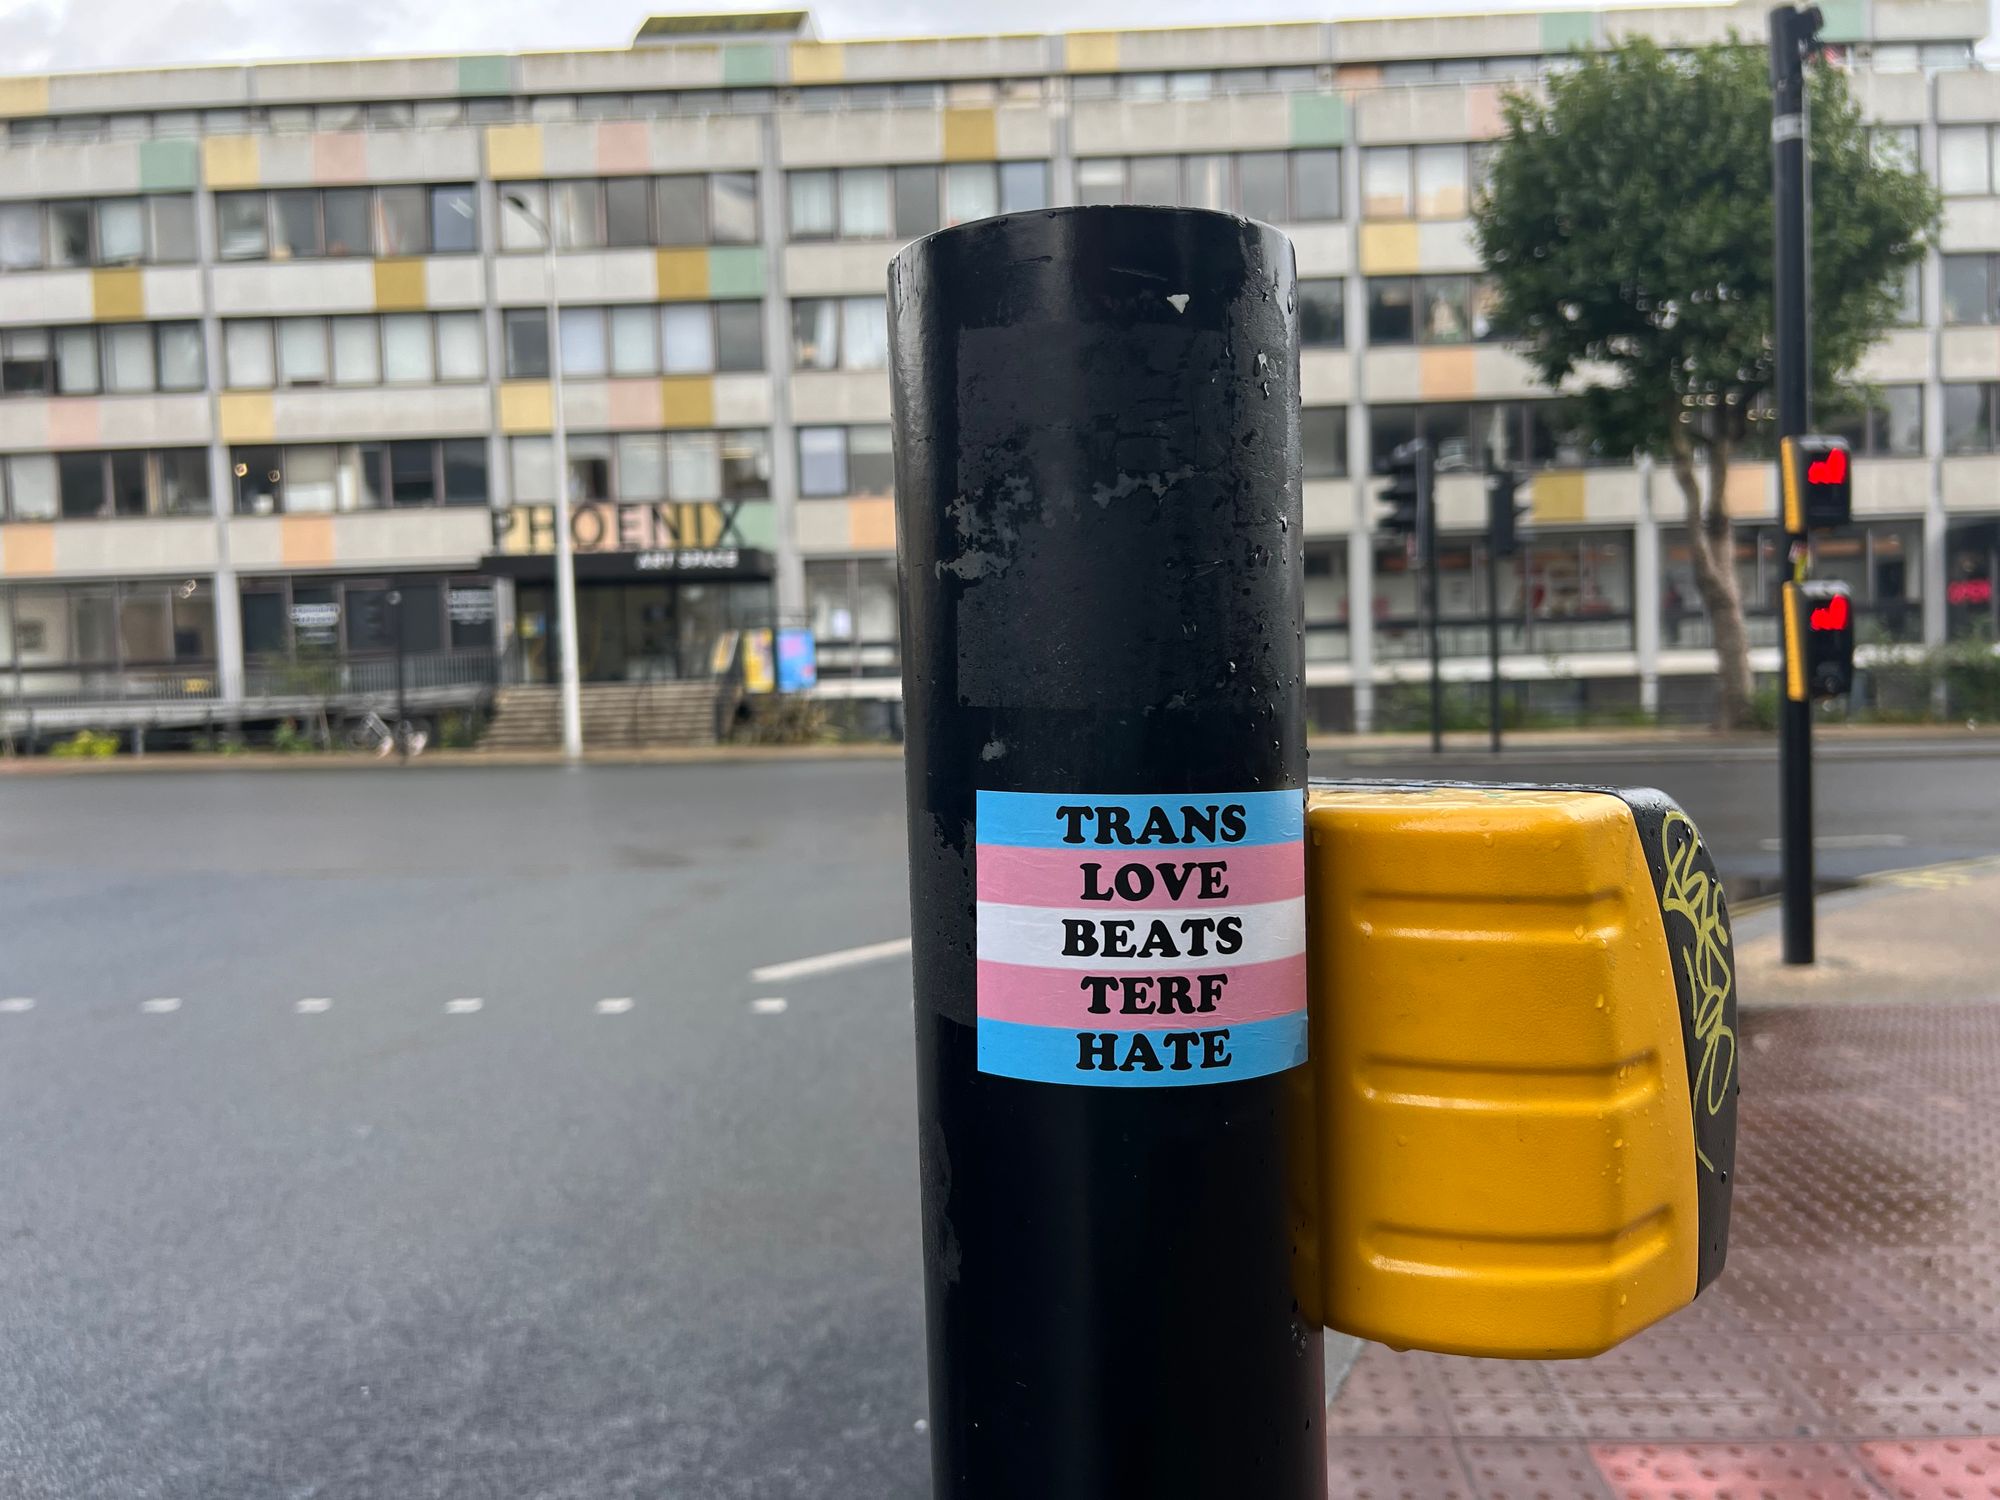 A "Trans Love Beats Terf Hate" sticker on a traffic light pole in front of the Phoenix Art Space